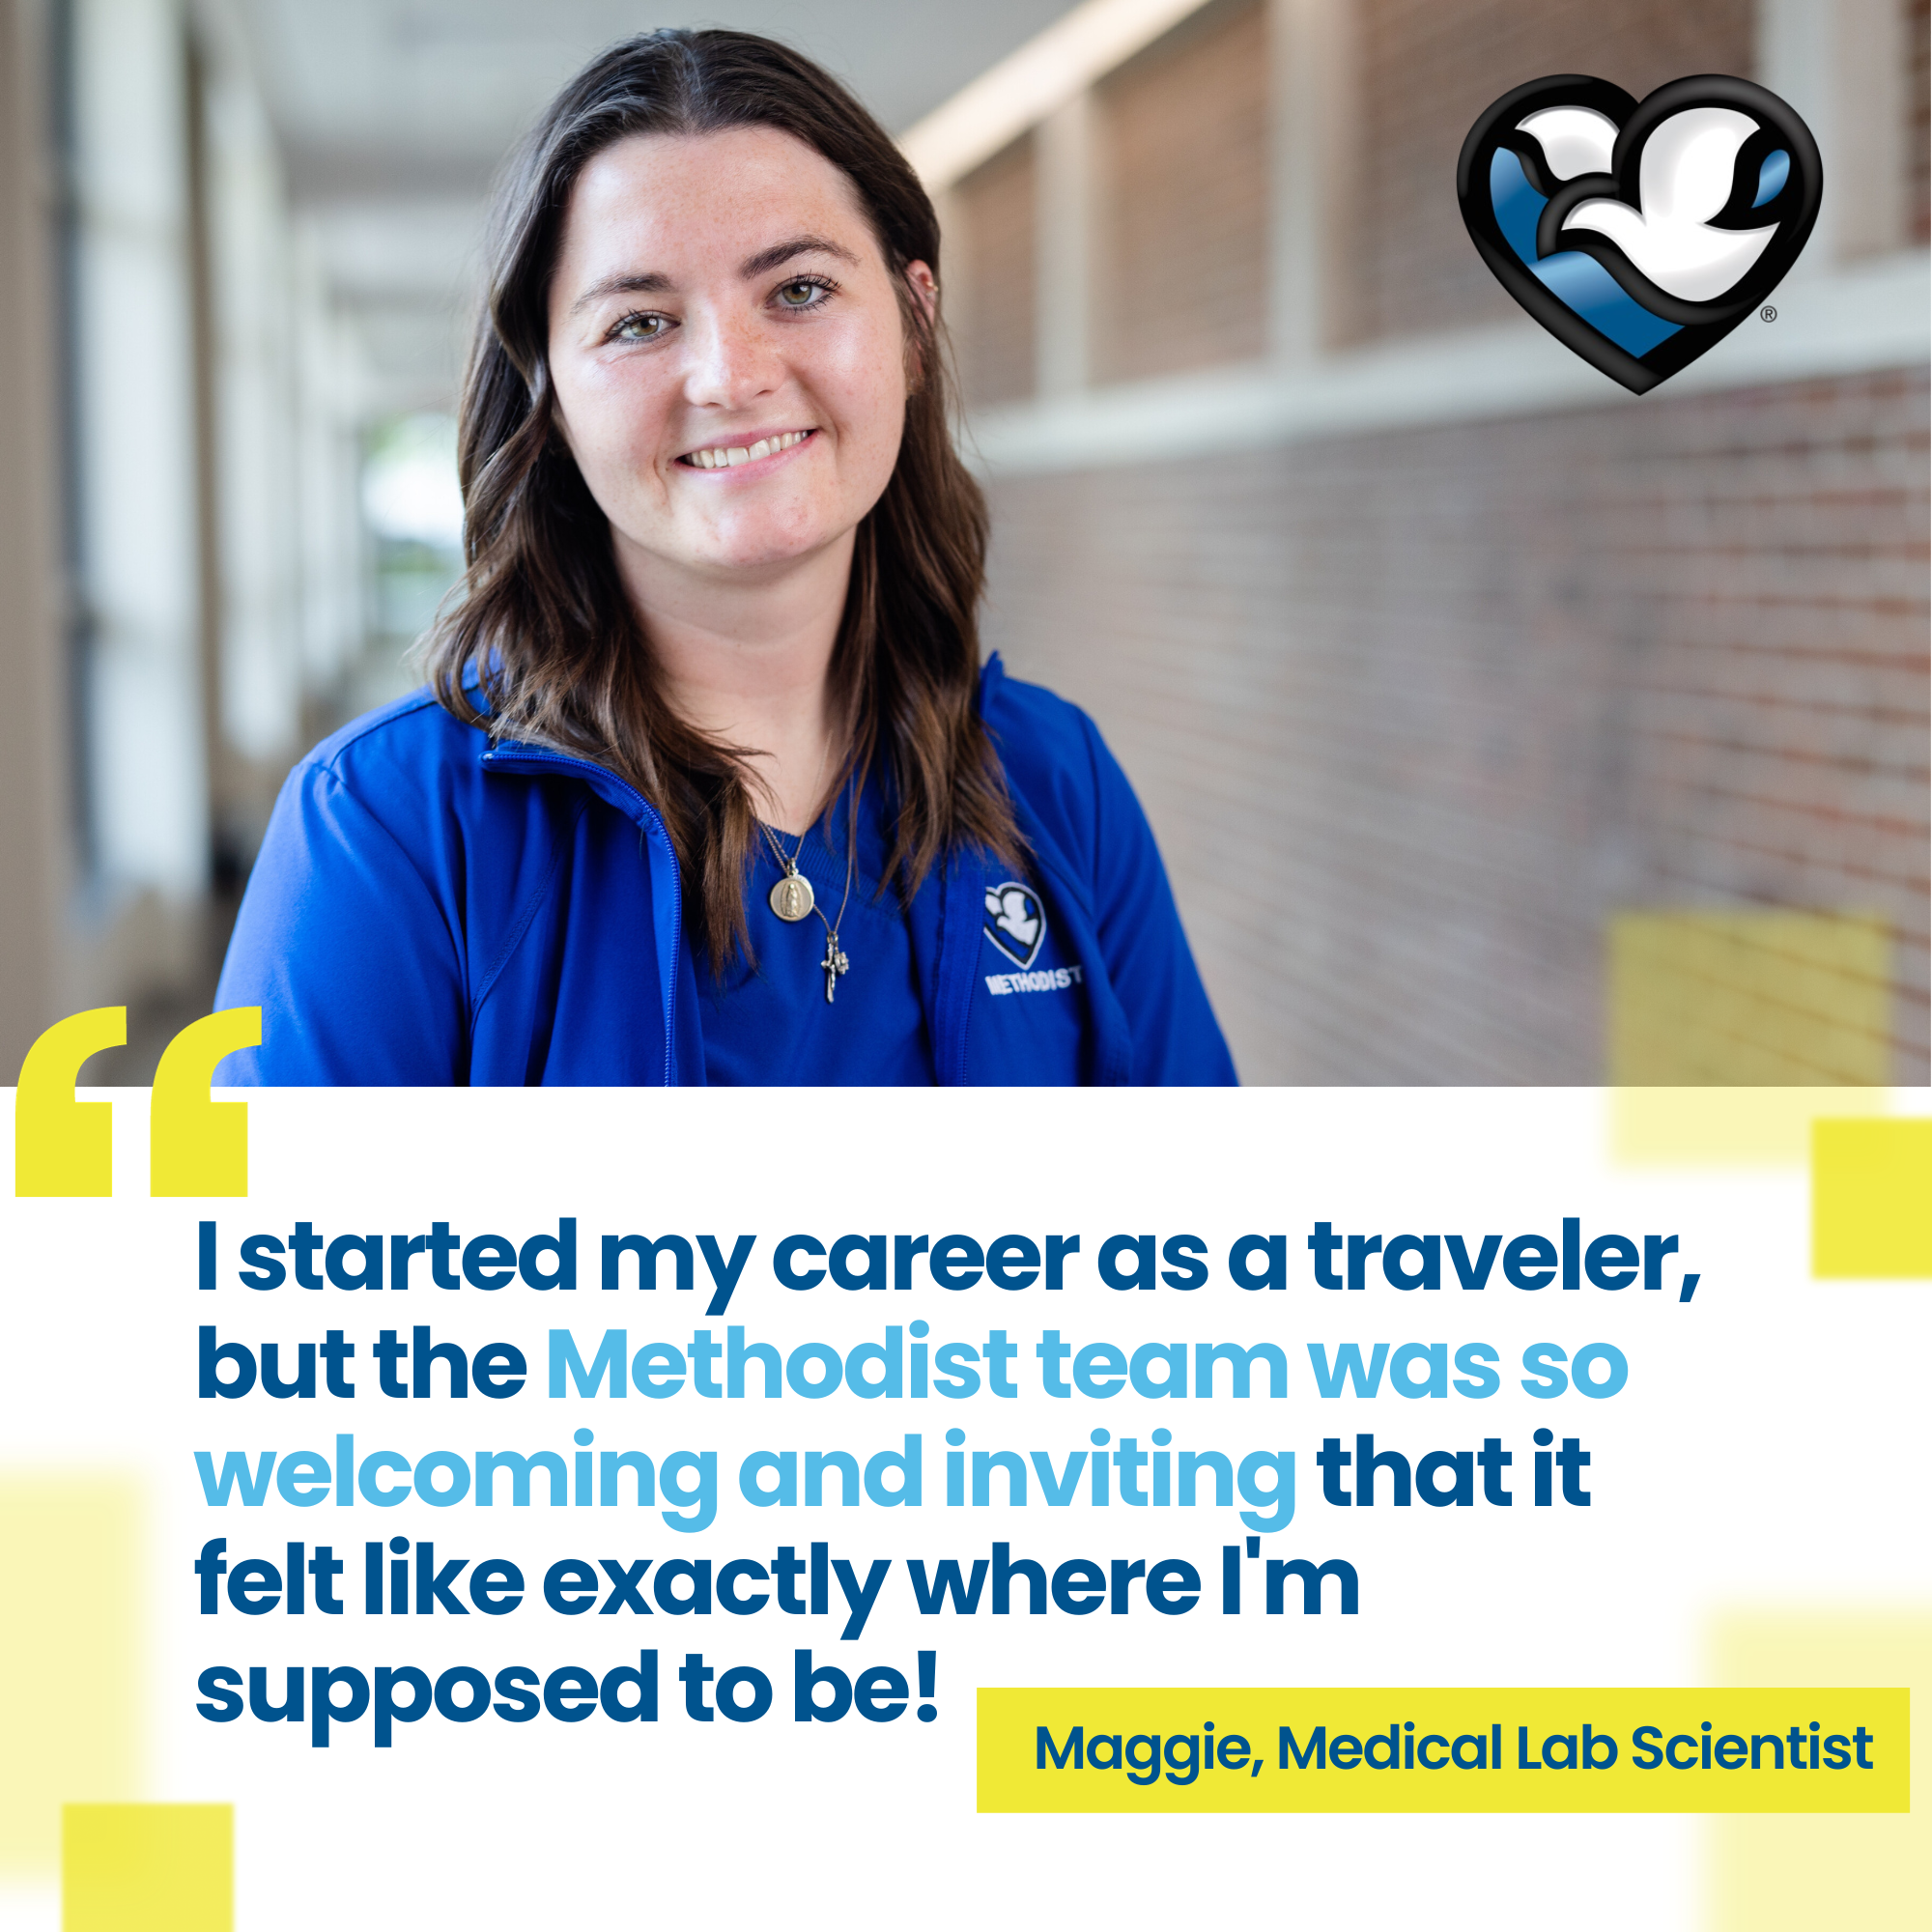 Portrait of and quote from Maggie, medical lab scientist: "I started my career as a traveler, but the Methodist team was so welcoming and inviting that it felt like exactly where I'm supposed to be!"